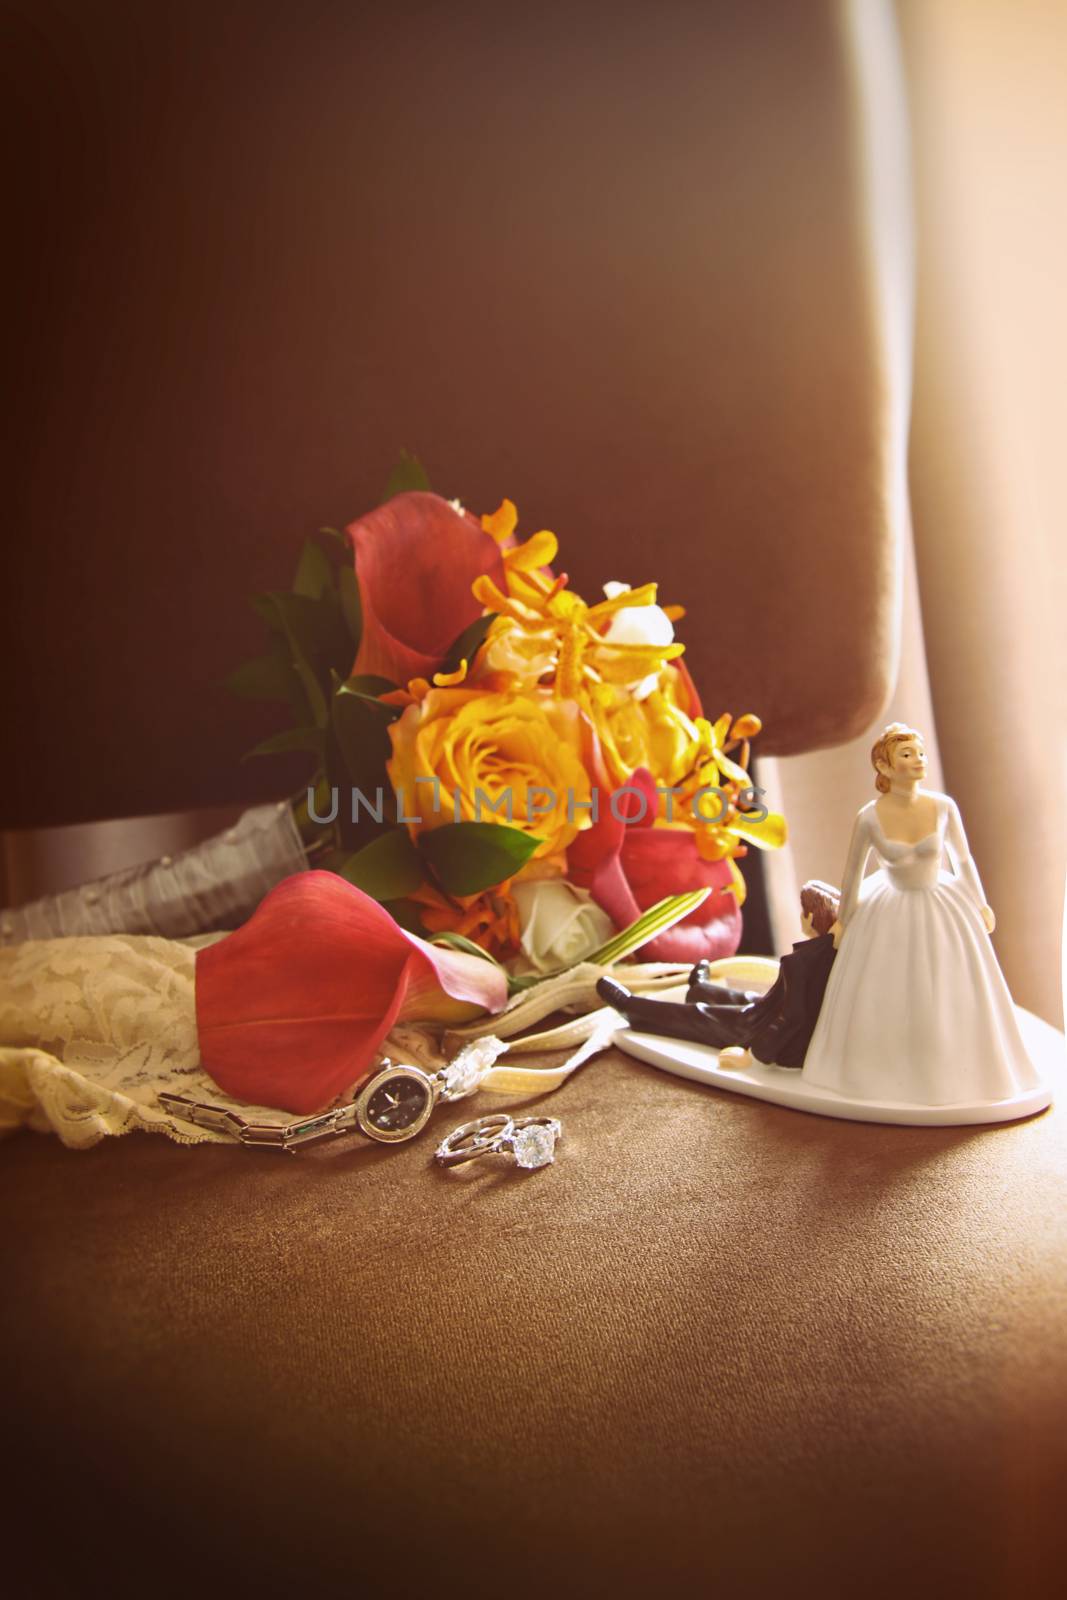 Cake figurines with bouquet on chair by Sandralise